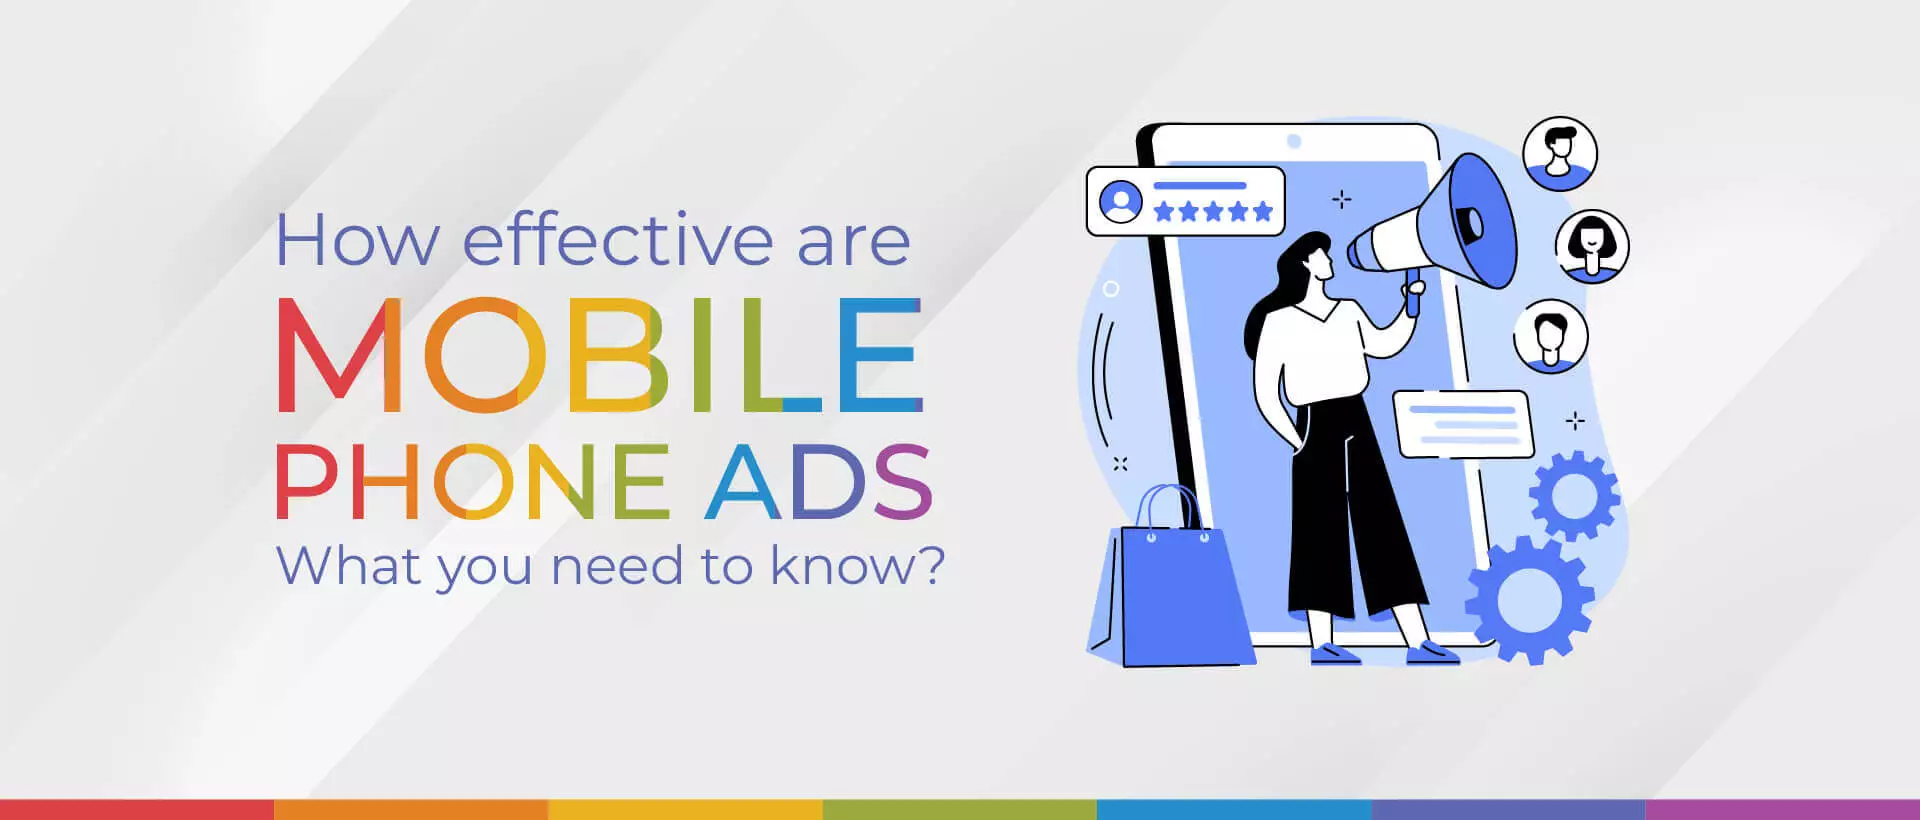 How effective are mobile phone ads? What you need to know.